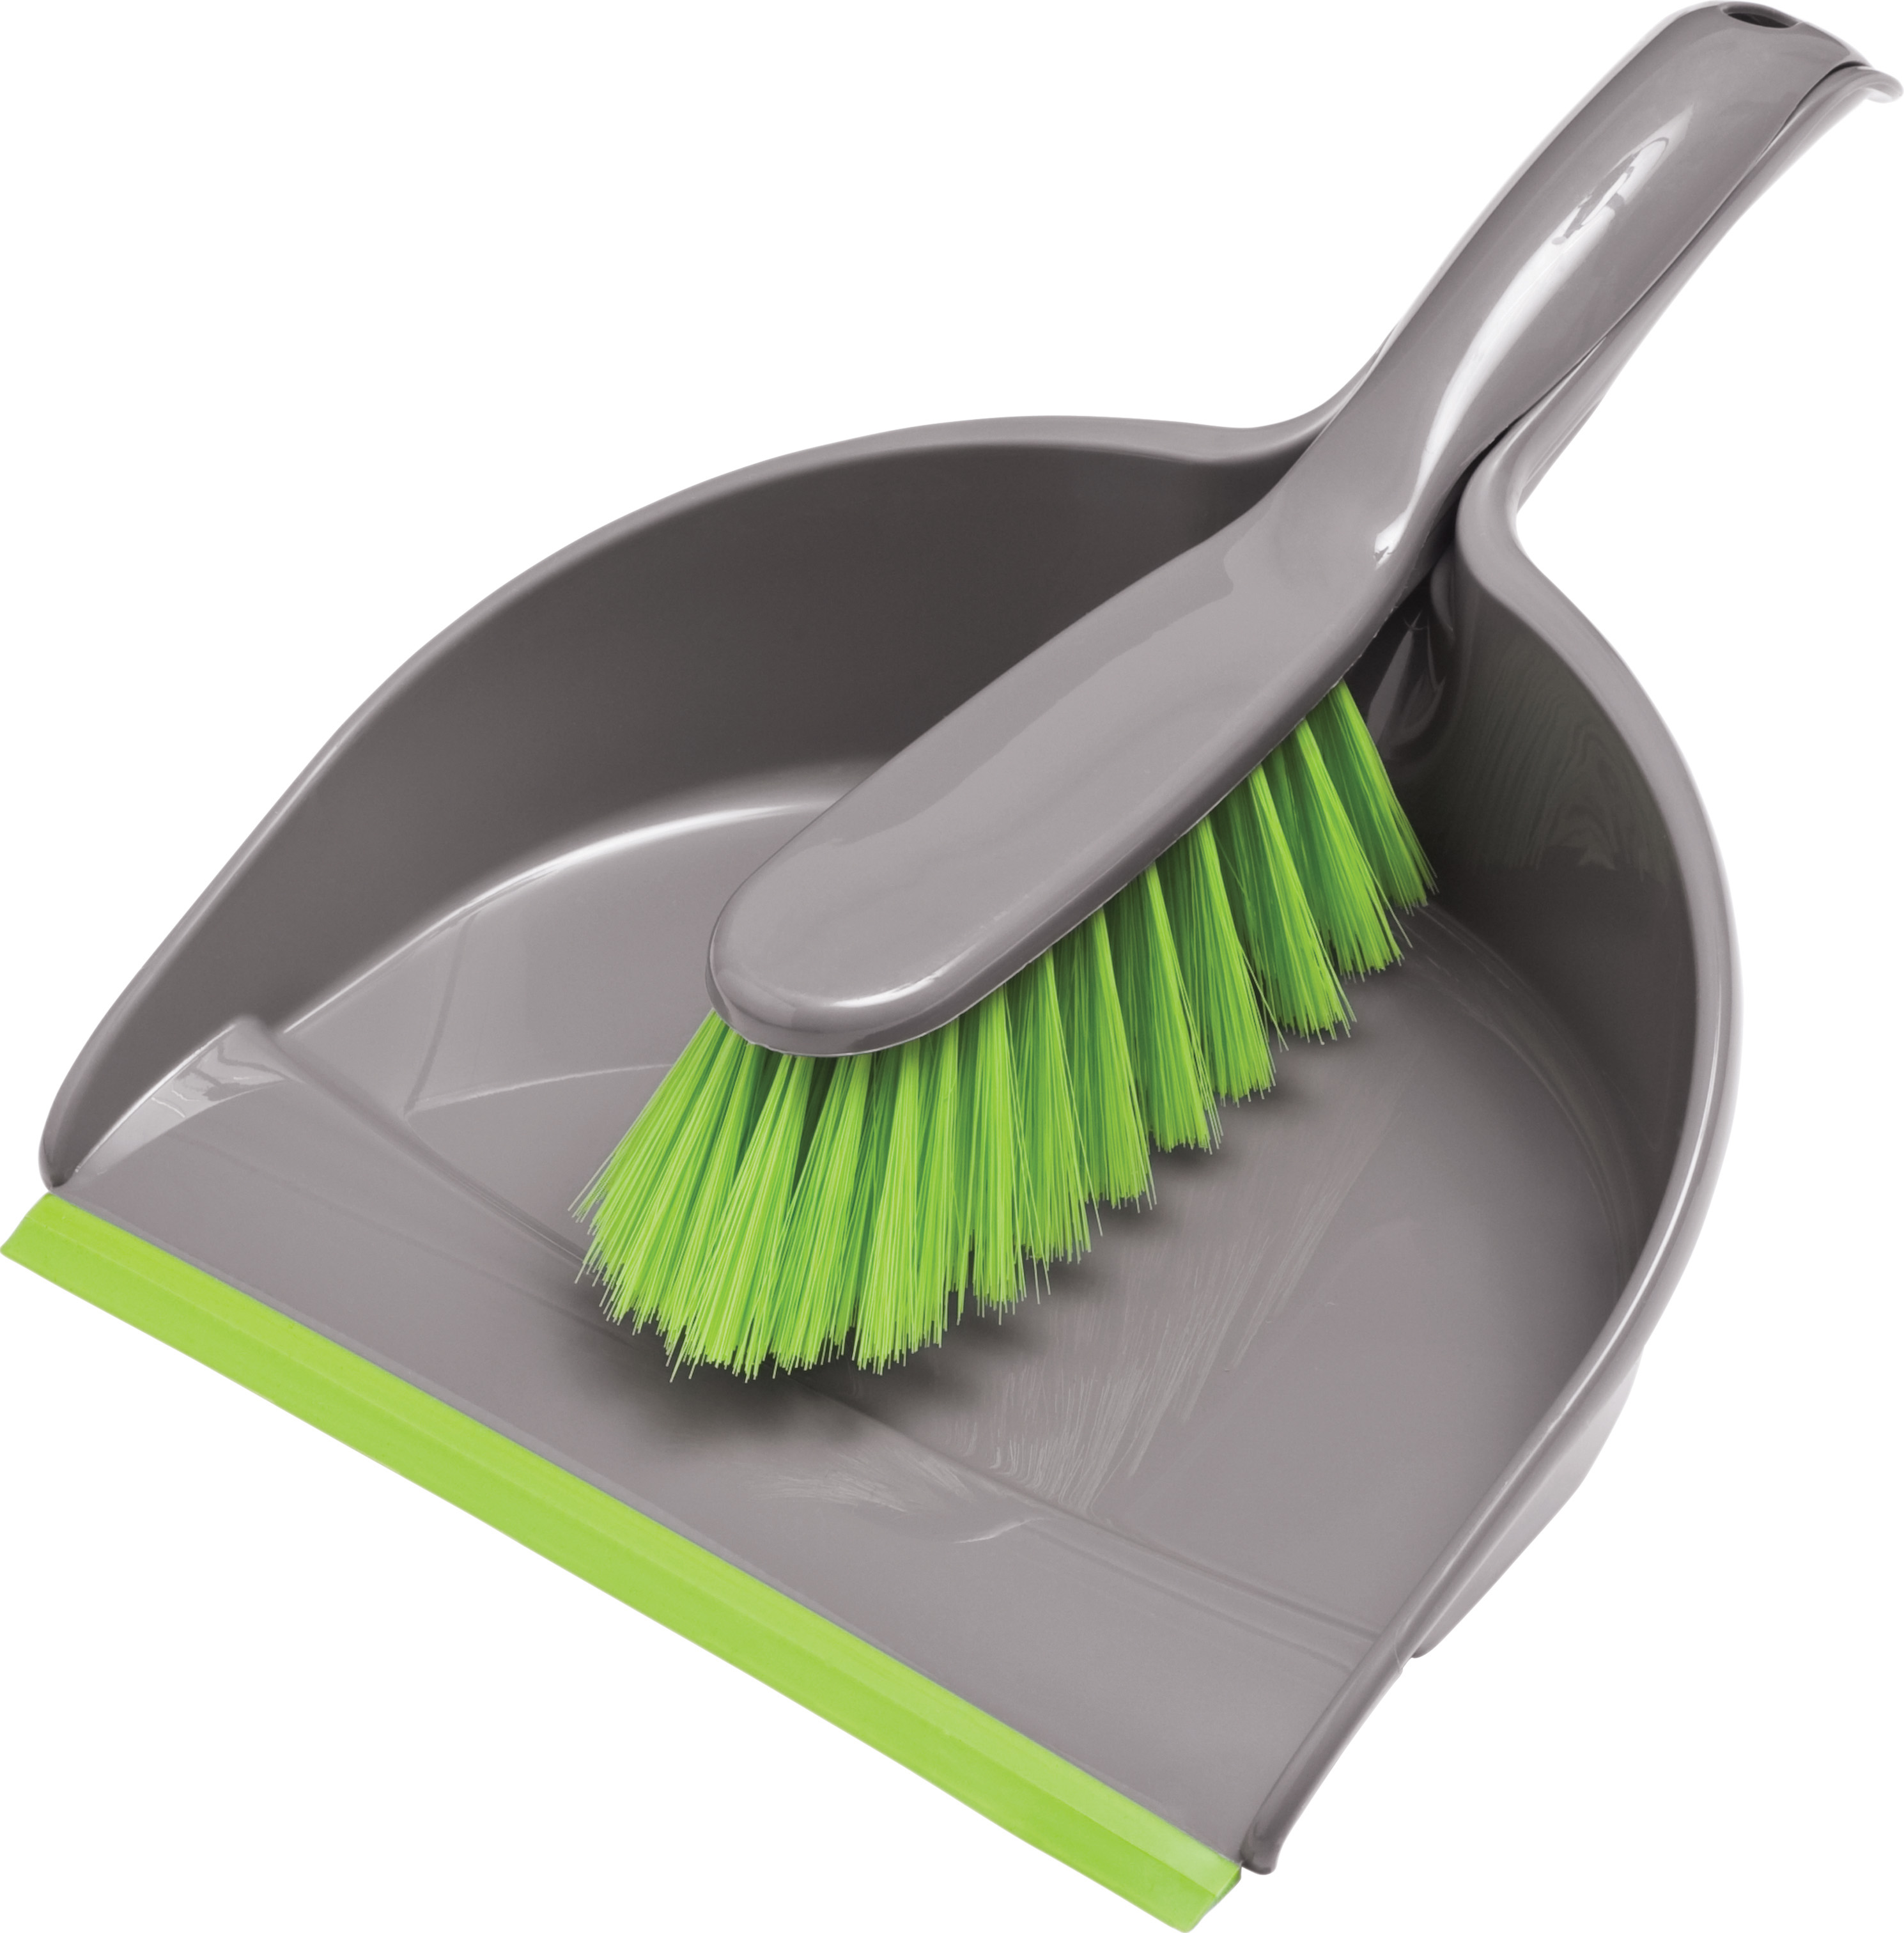 02316 - plastic dust pan with rubber lip and brush, 32x22 cm, assorted colors